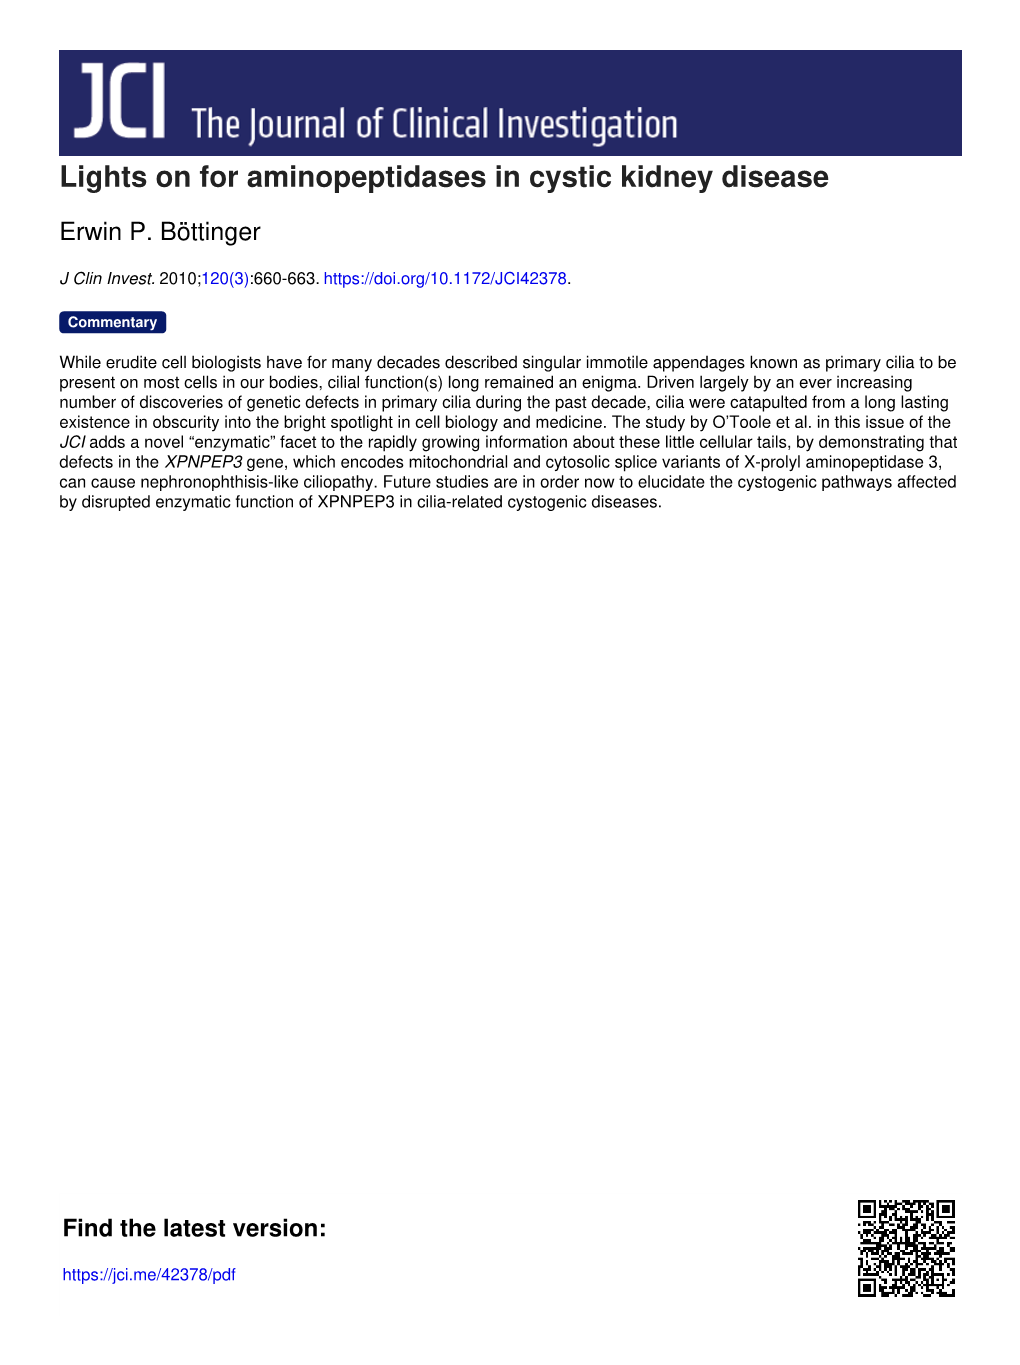 Lights on for Aminopeptidases in Cystic Kidney Disease